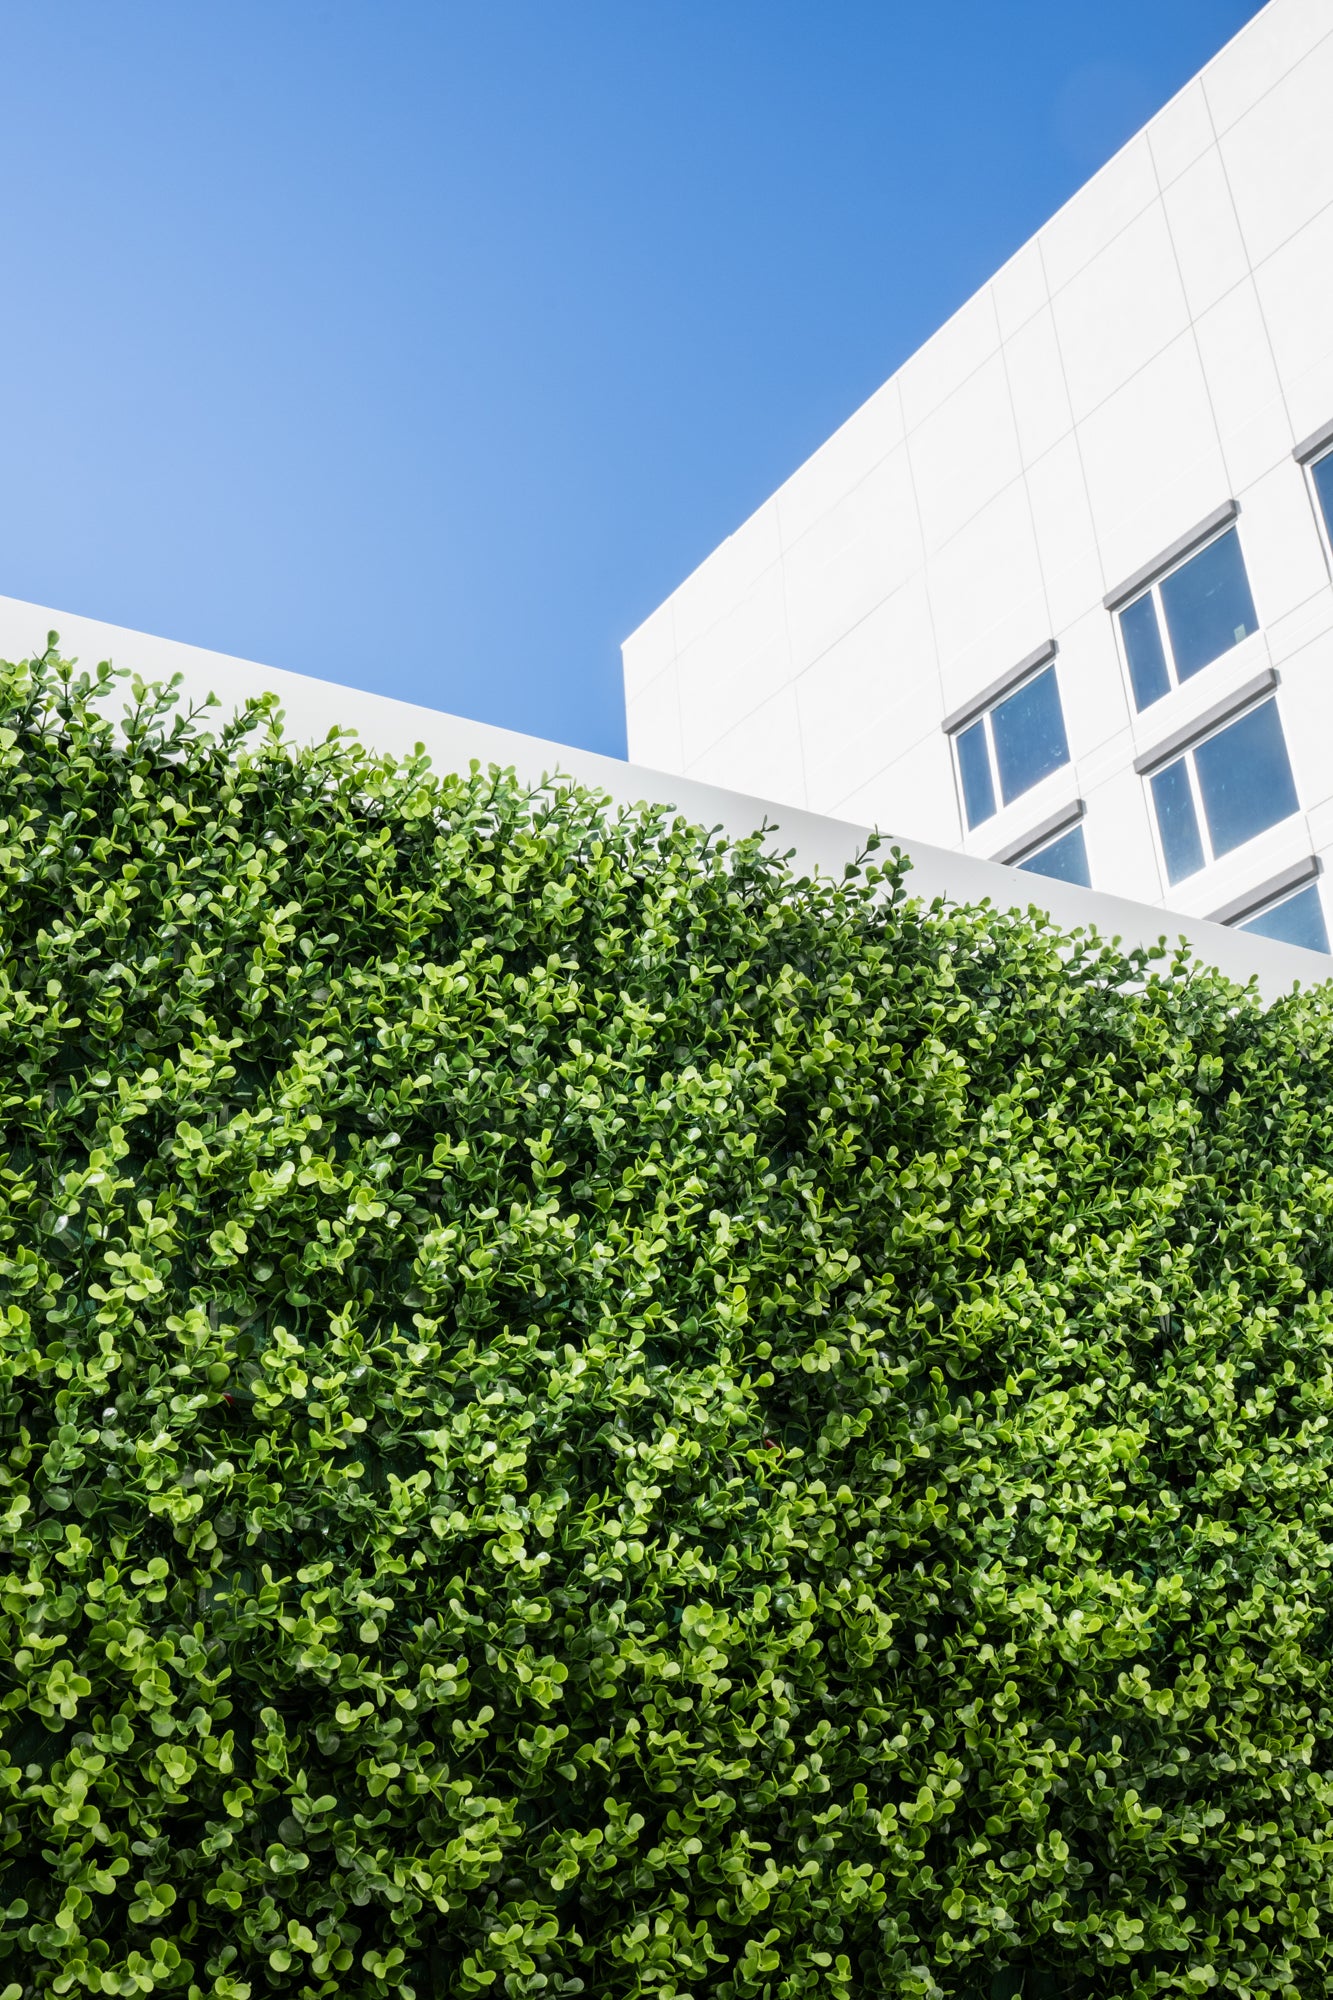 Realistic Wholesale Greenery Wall Outside Commercial Building with Blue Sky - Enduraleaf